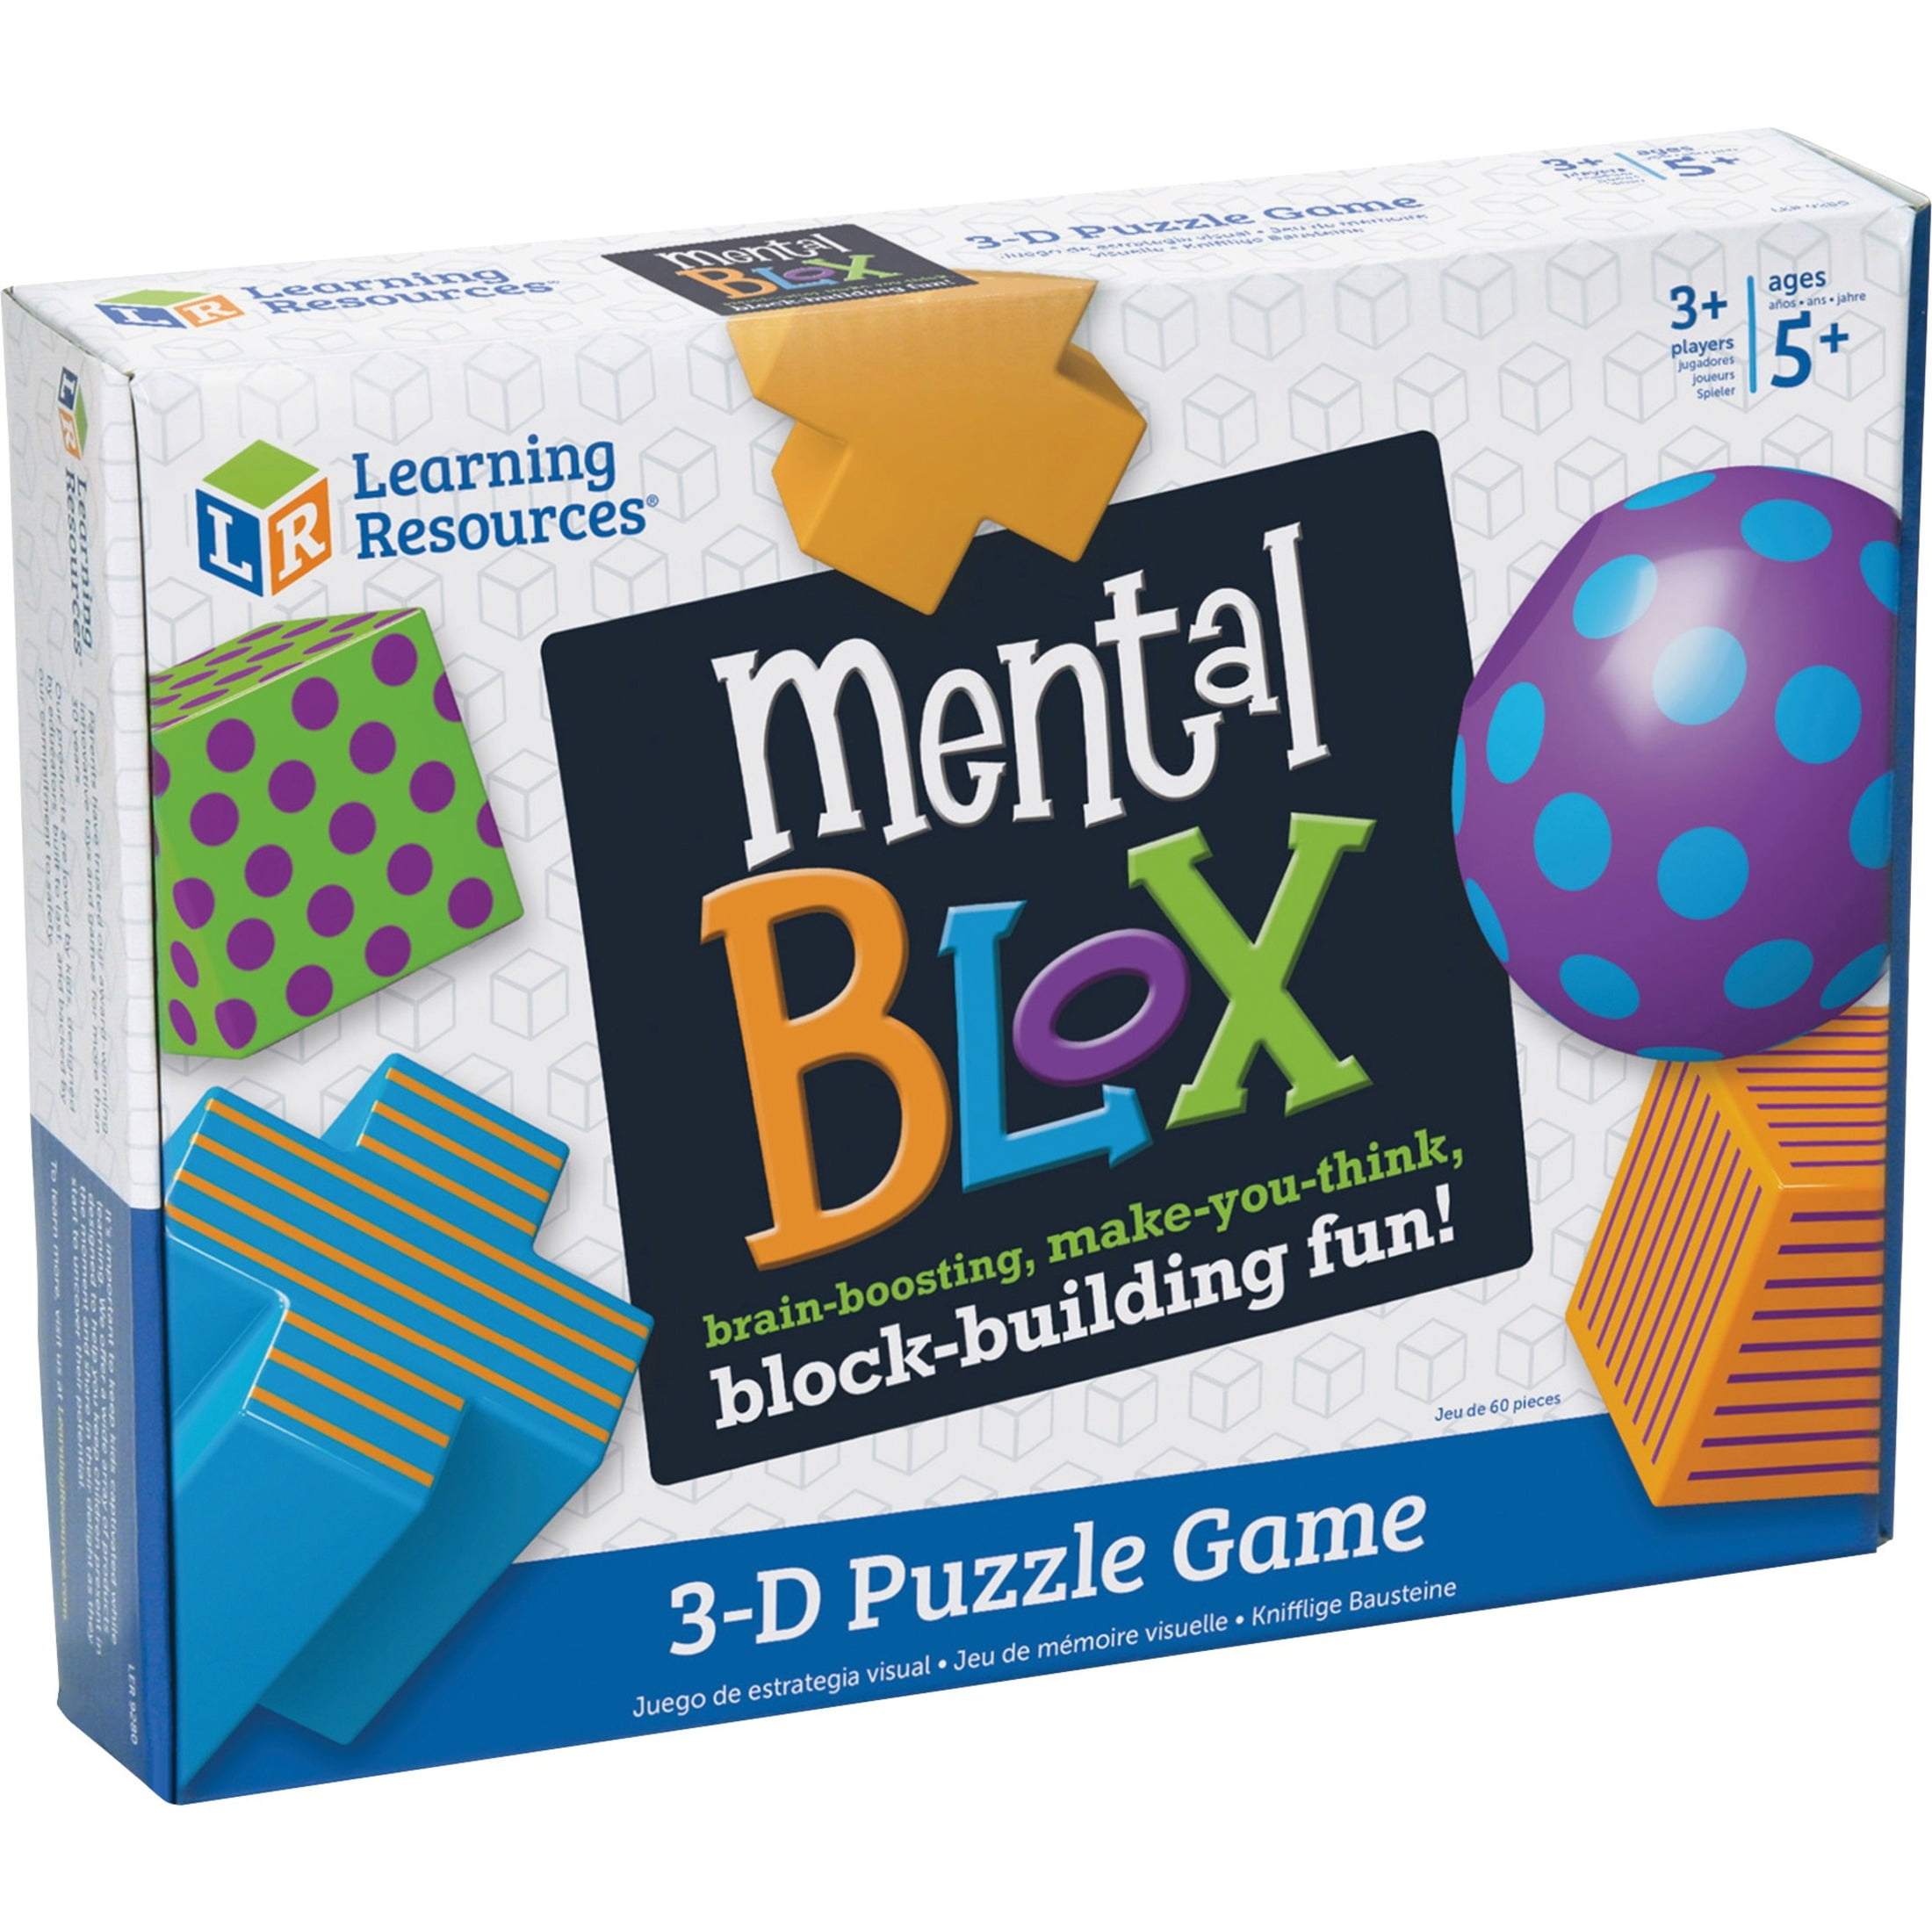  Learning Resources Mental Blox Go! 30 Games and Puzzles, Ages  5+ Educational Travel Games for Kids, Brain Teaser Games and Puzzles, STEM  Games, 3-D Puzzles, Critical Thinking for Kids : Toys